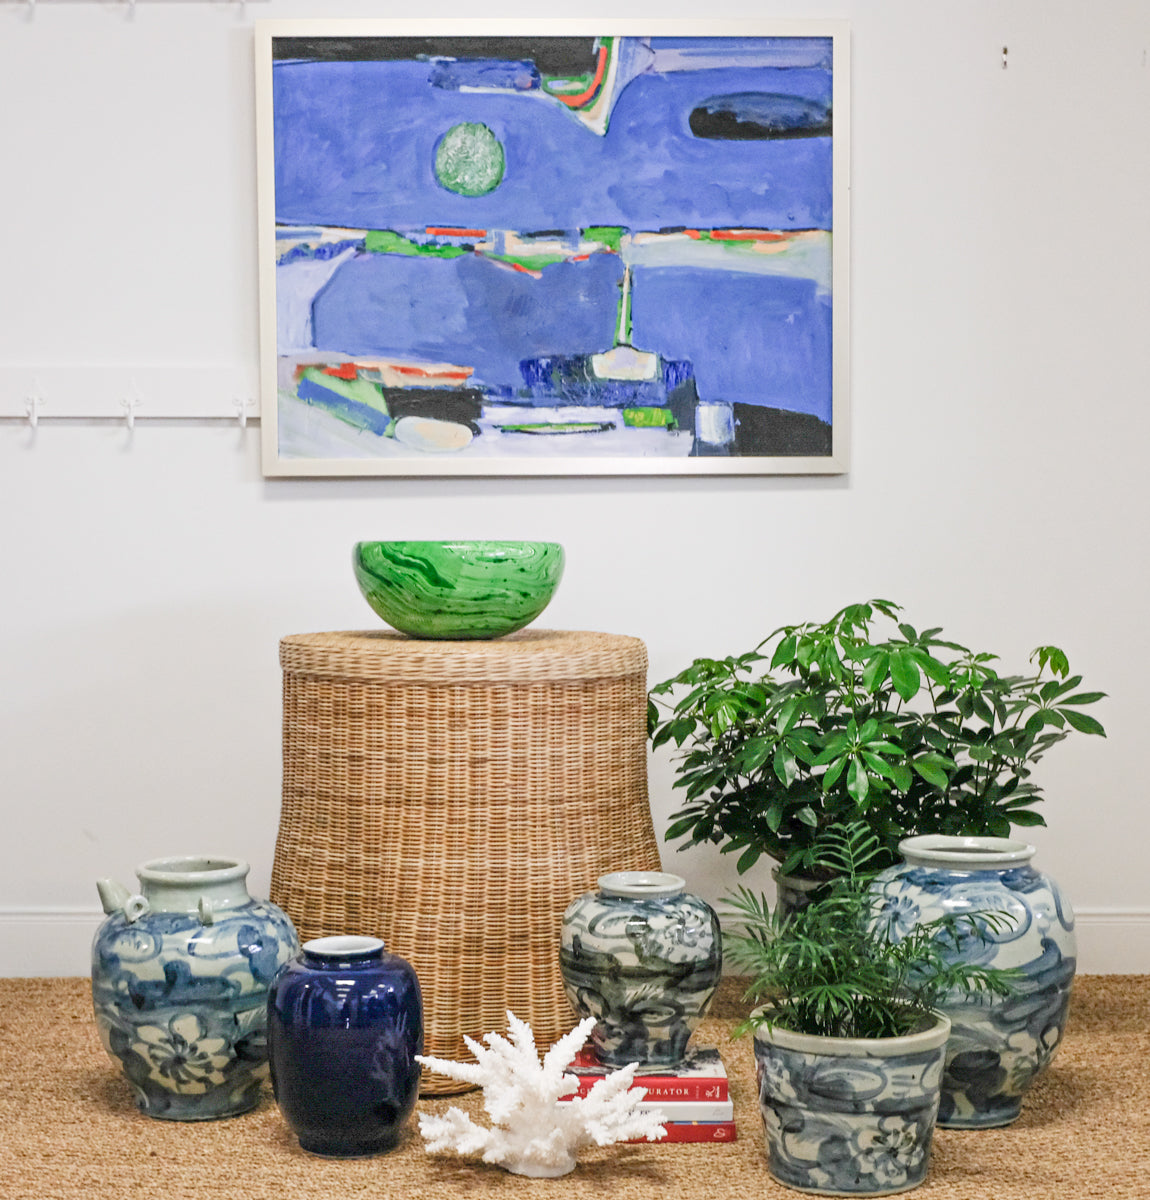 abstract artwork surrounded by blue and white pottery with one green bowl on top of wicker table